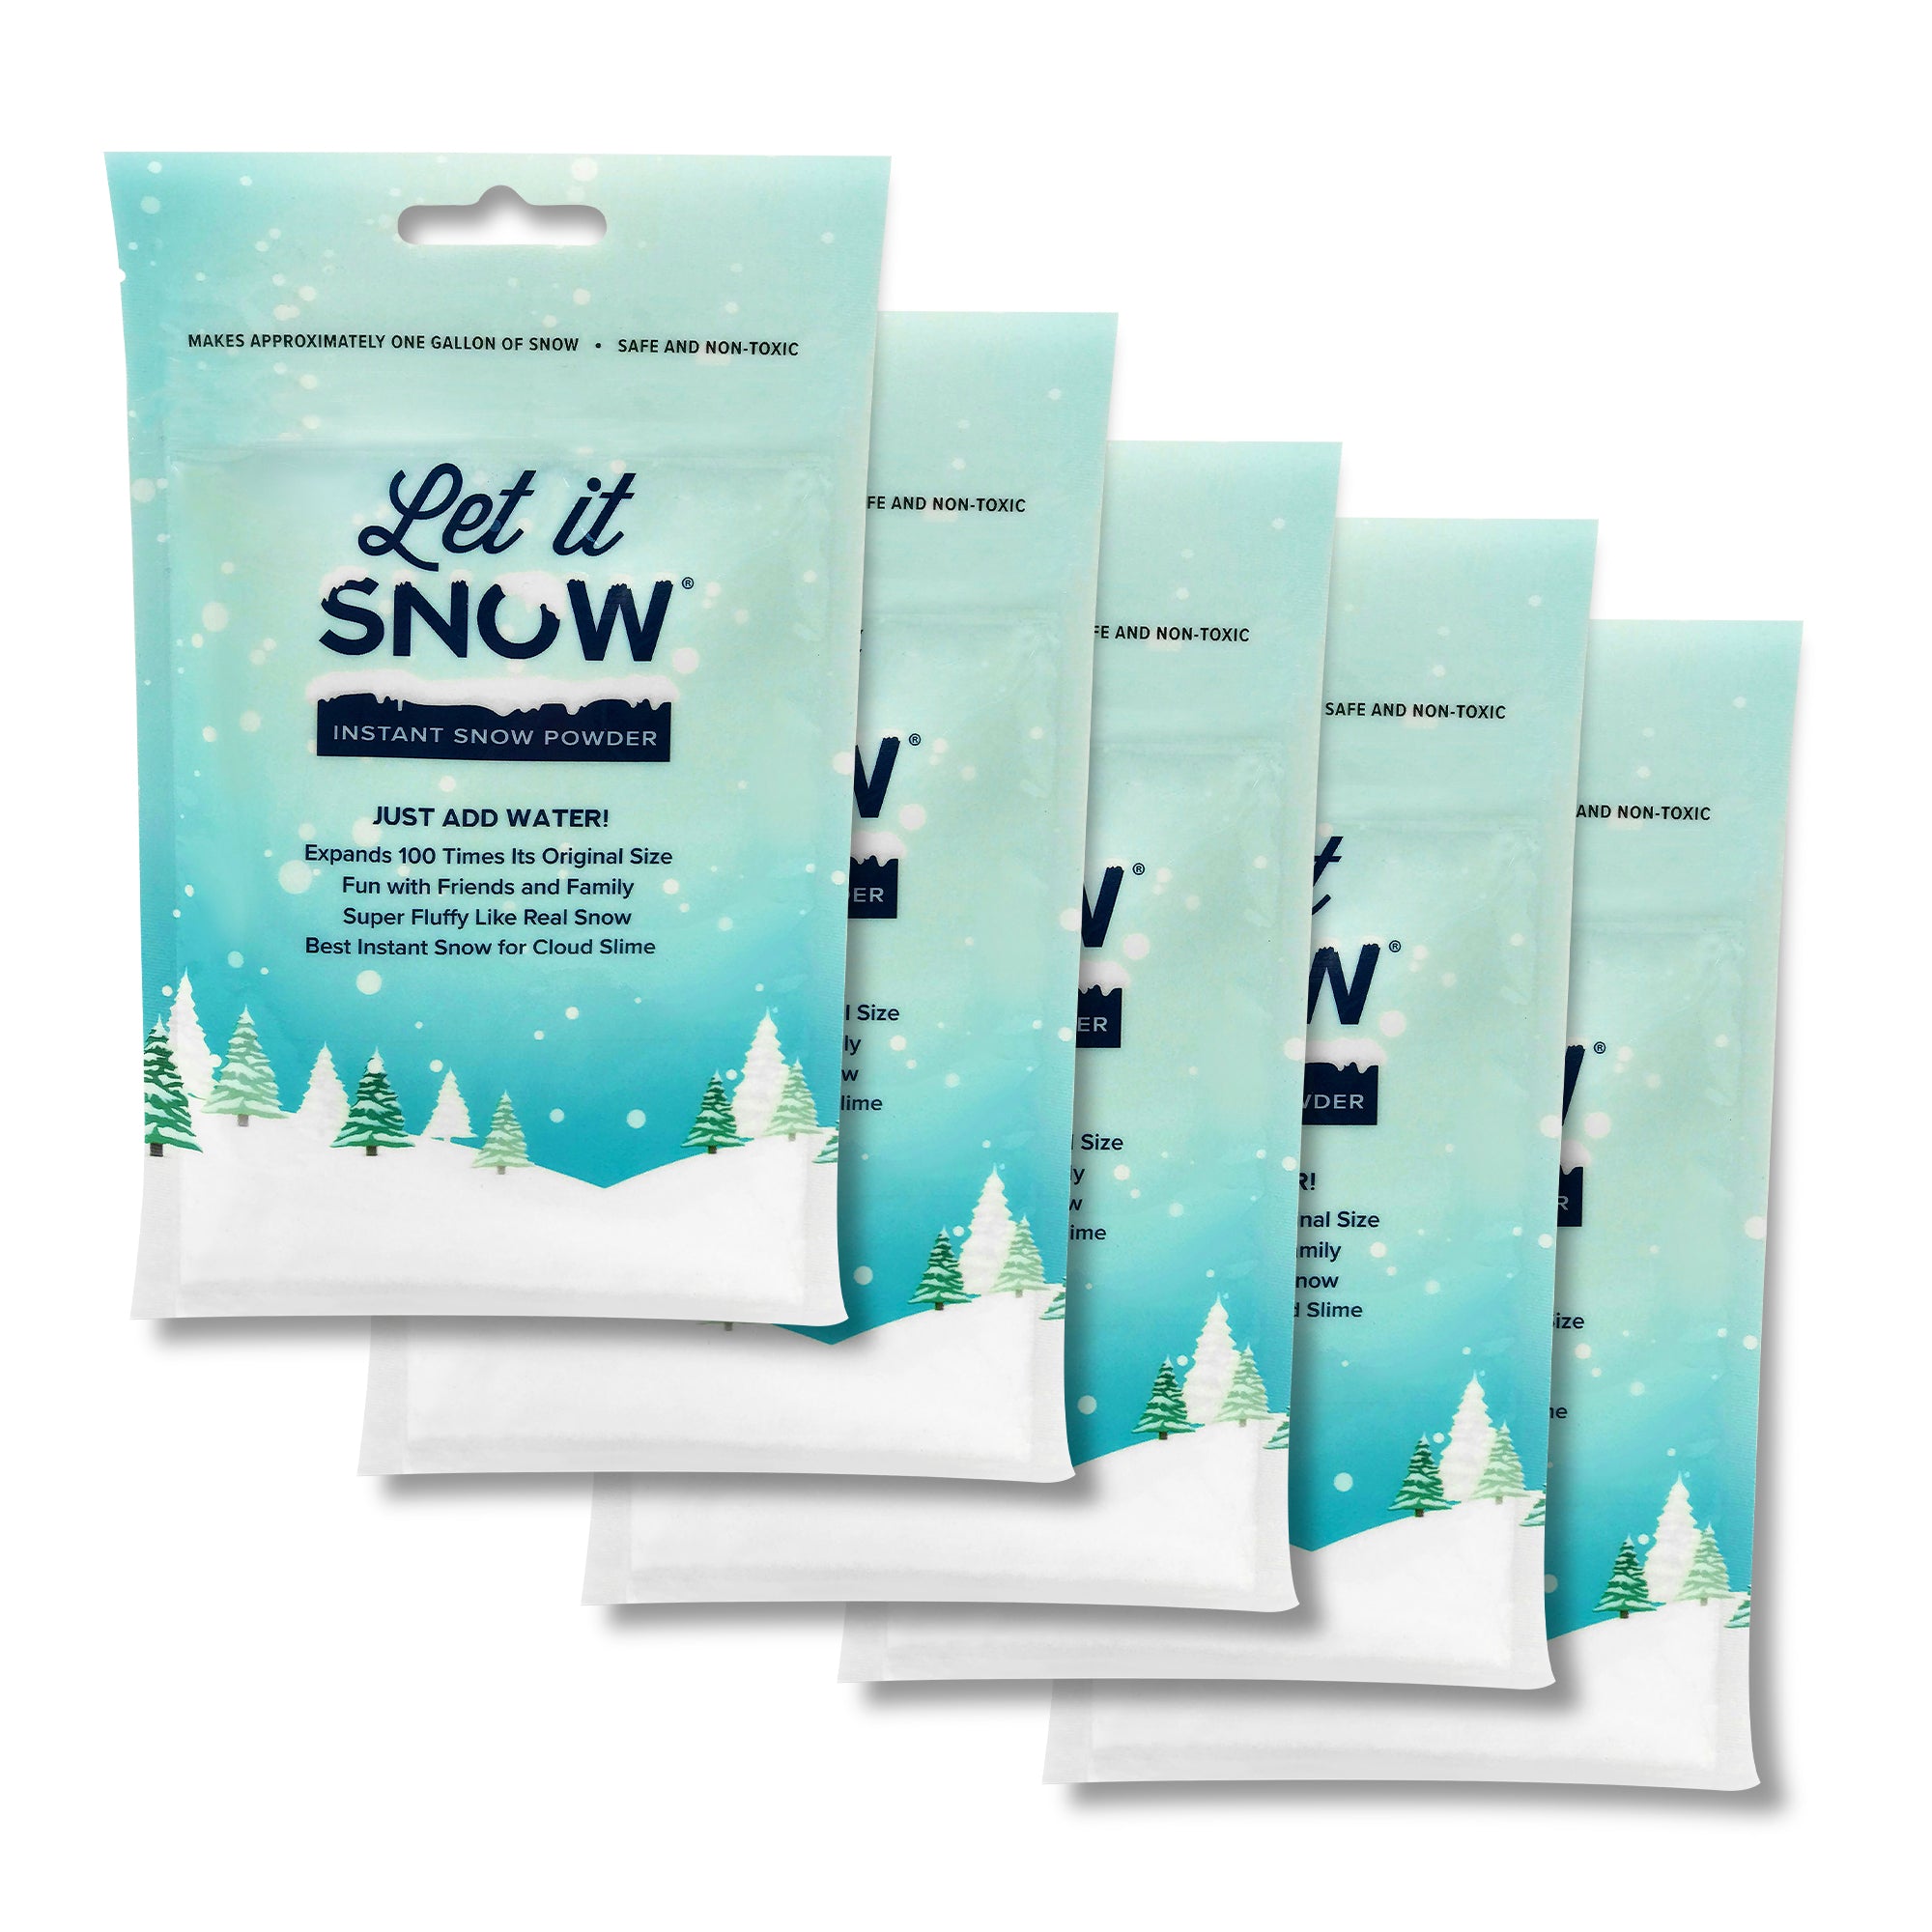 Let it Snow Let it Snow Let It Snow instant snow powder for cloud slim for  slime and holiday snow premium fake snow US-made for decoration 